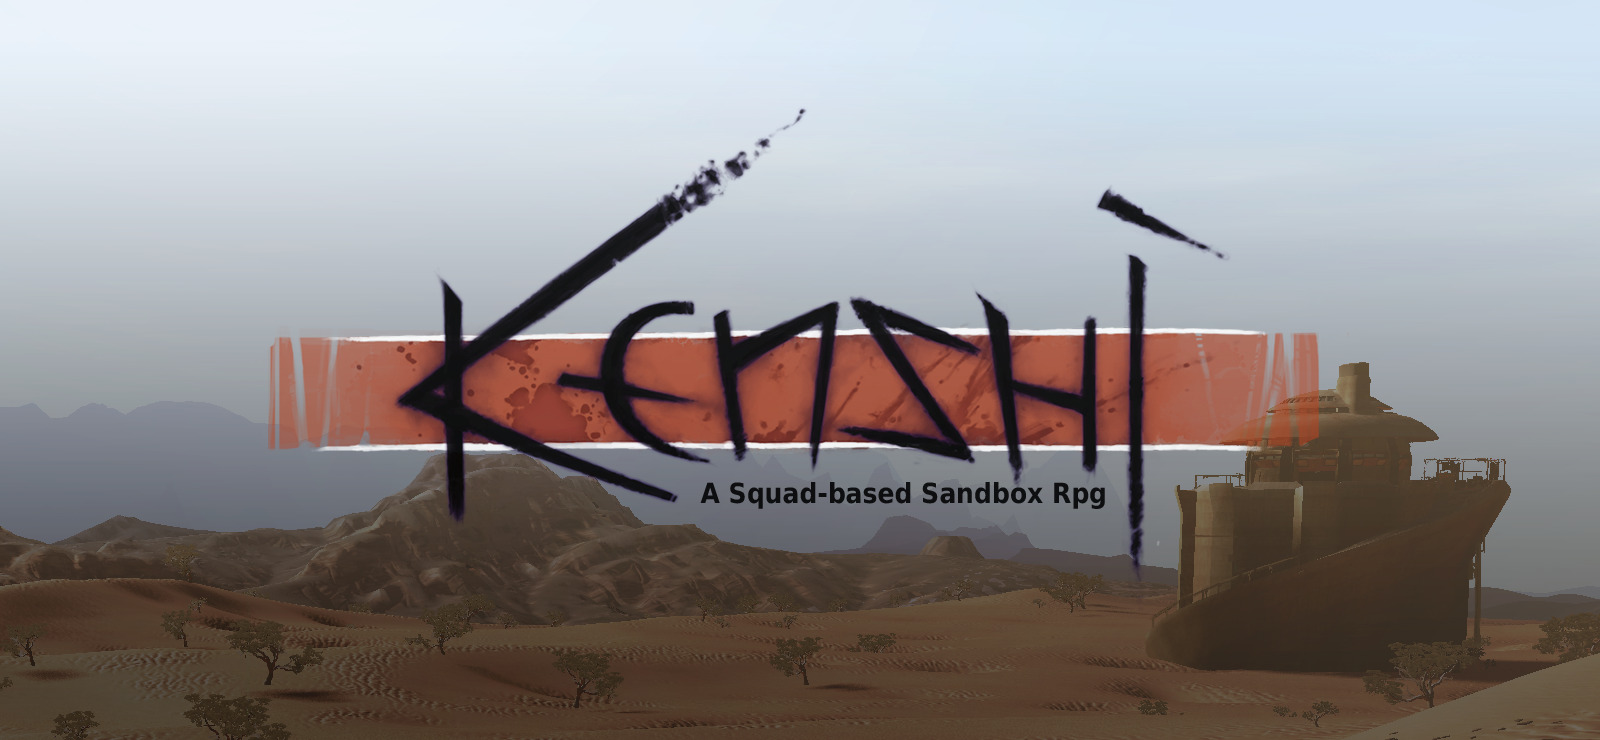 download kenshi like games for free